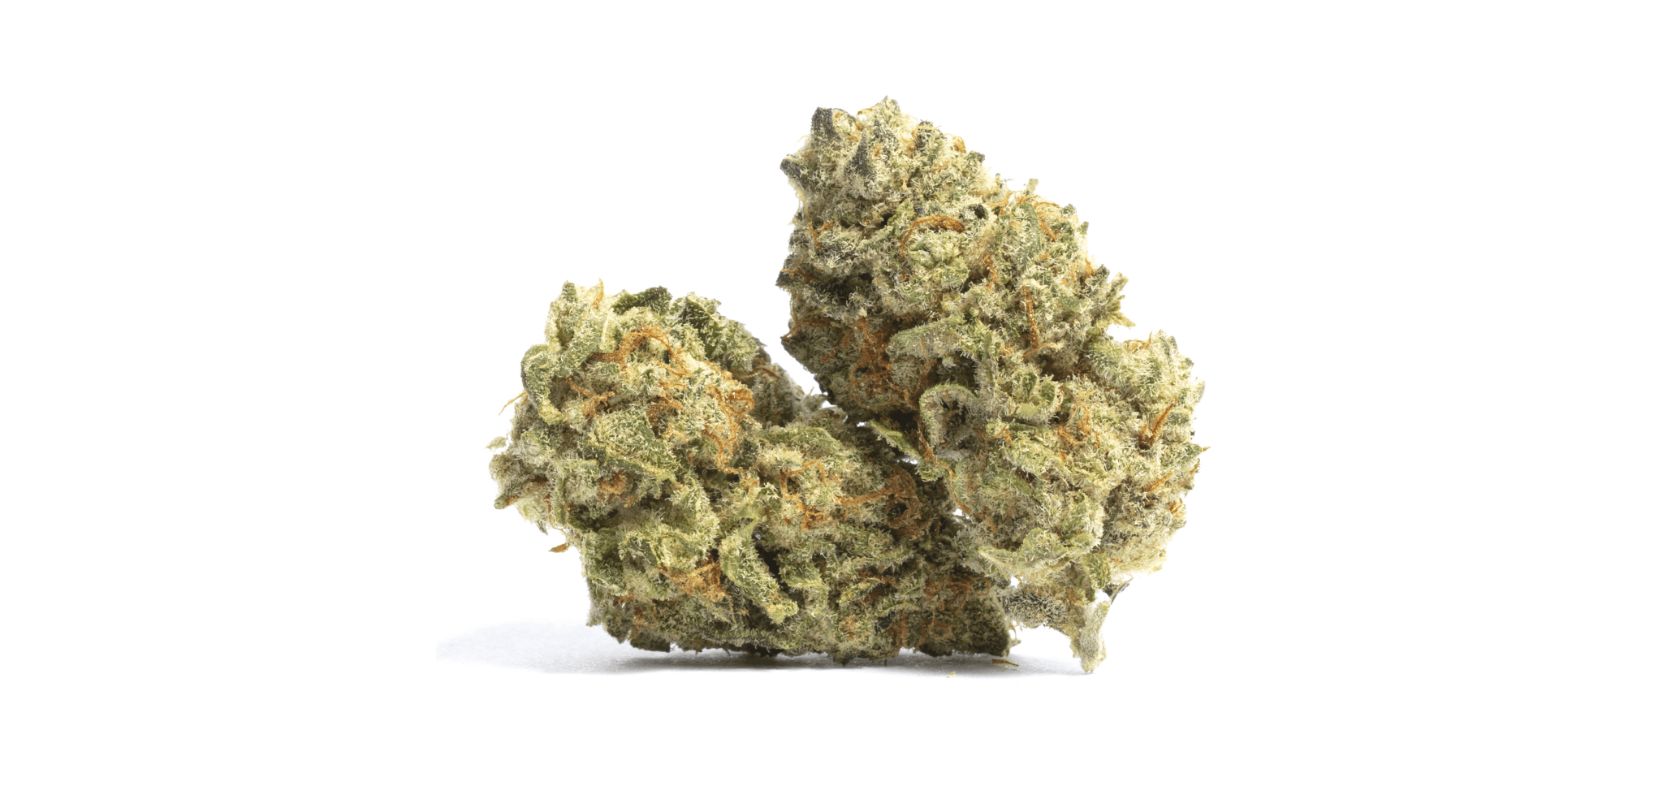 In this expert guide, we'll give you the lowdown on all the must-know facts about the Godfather OG strain. 